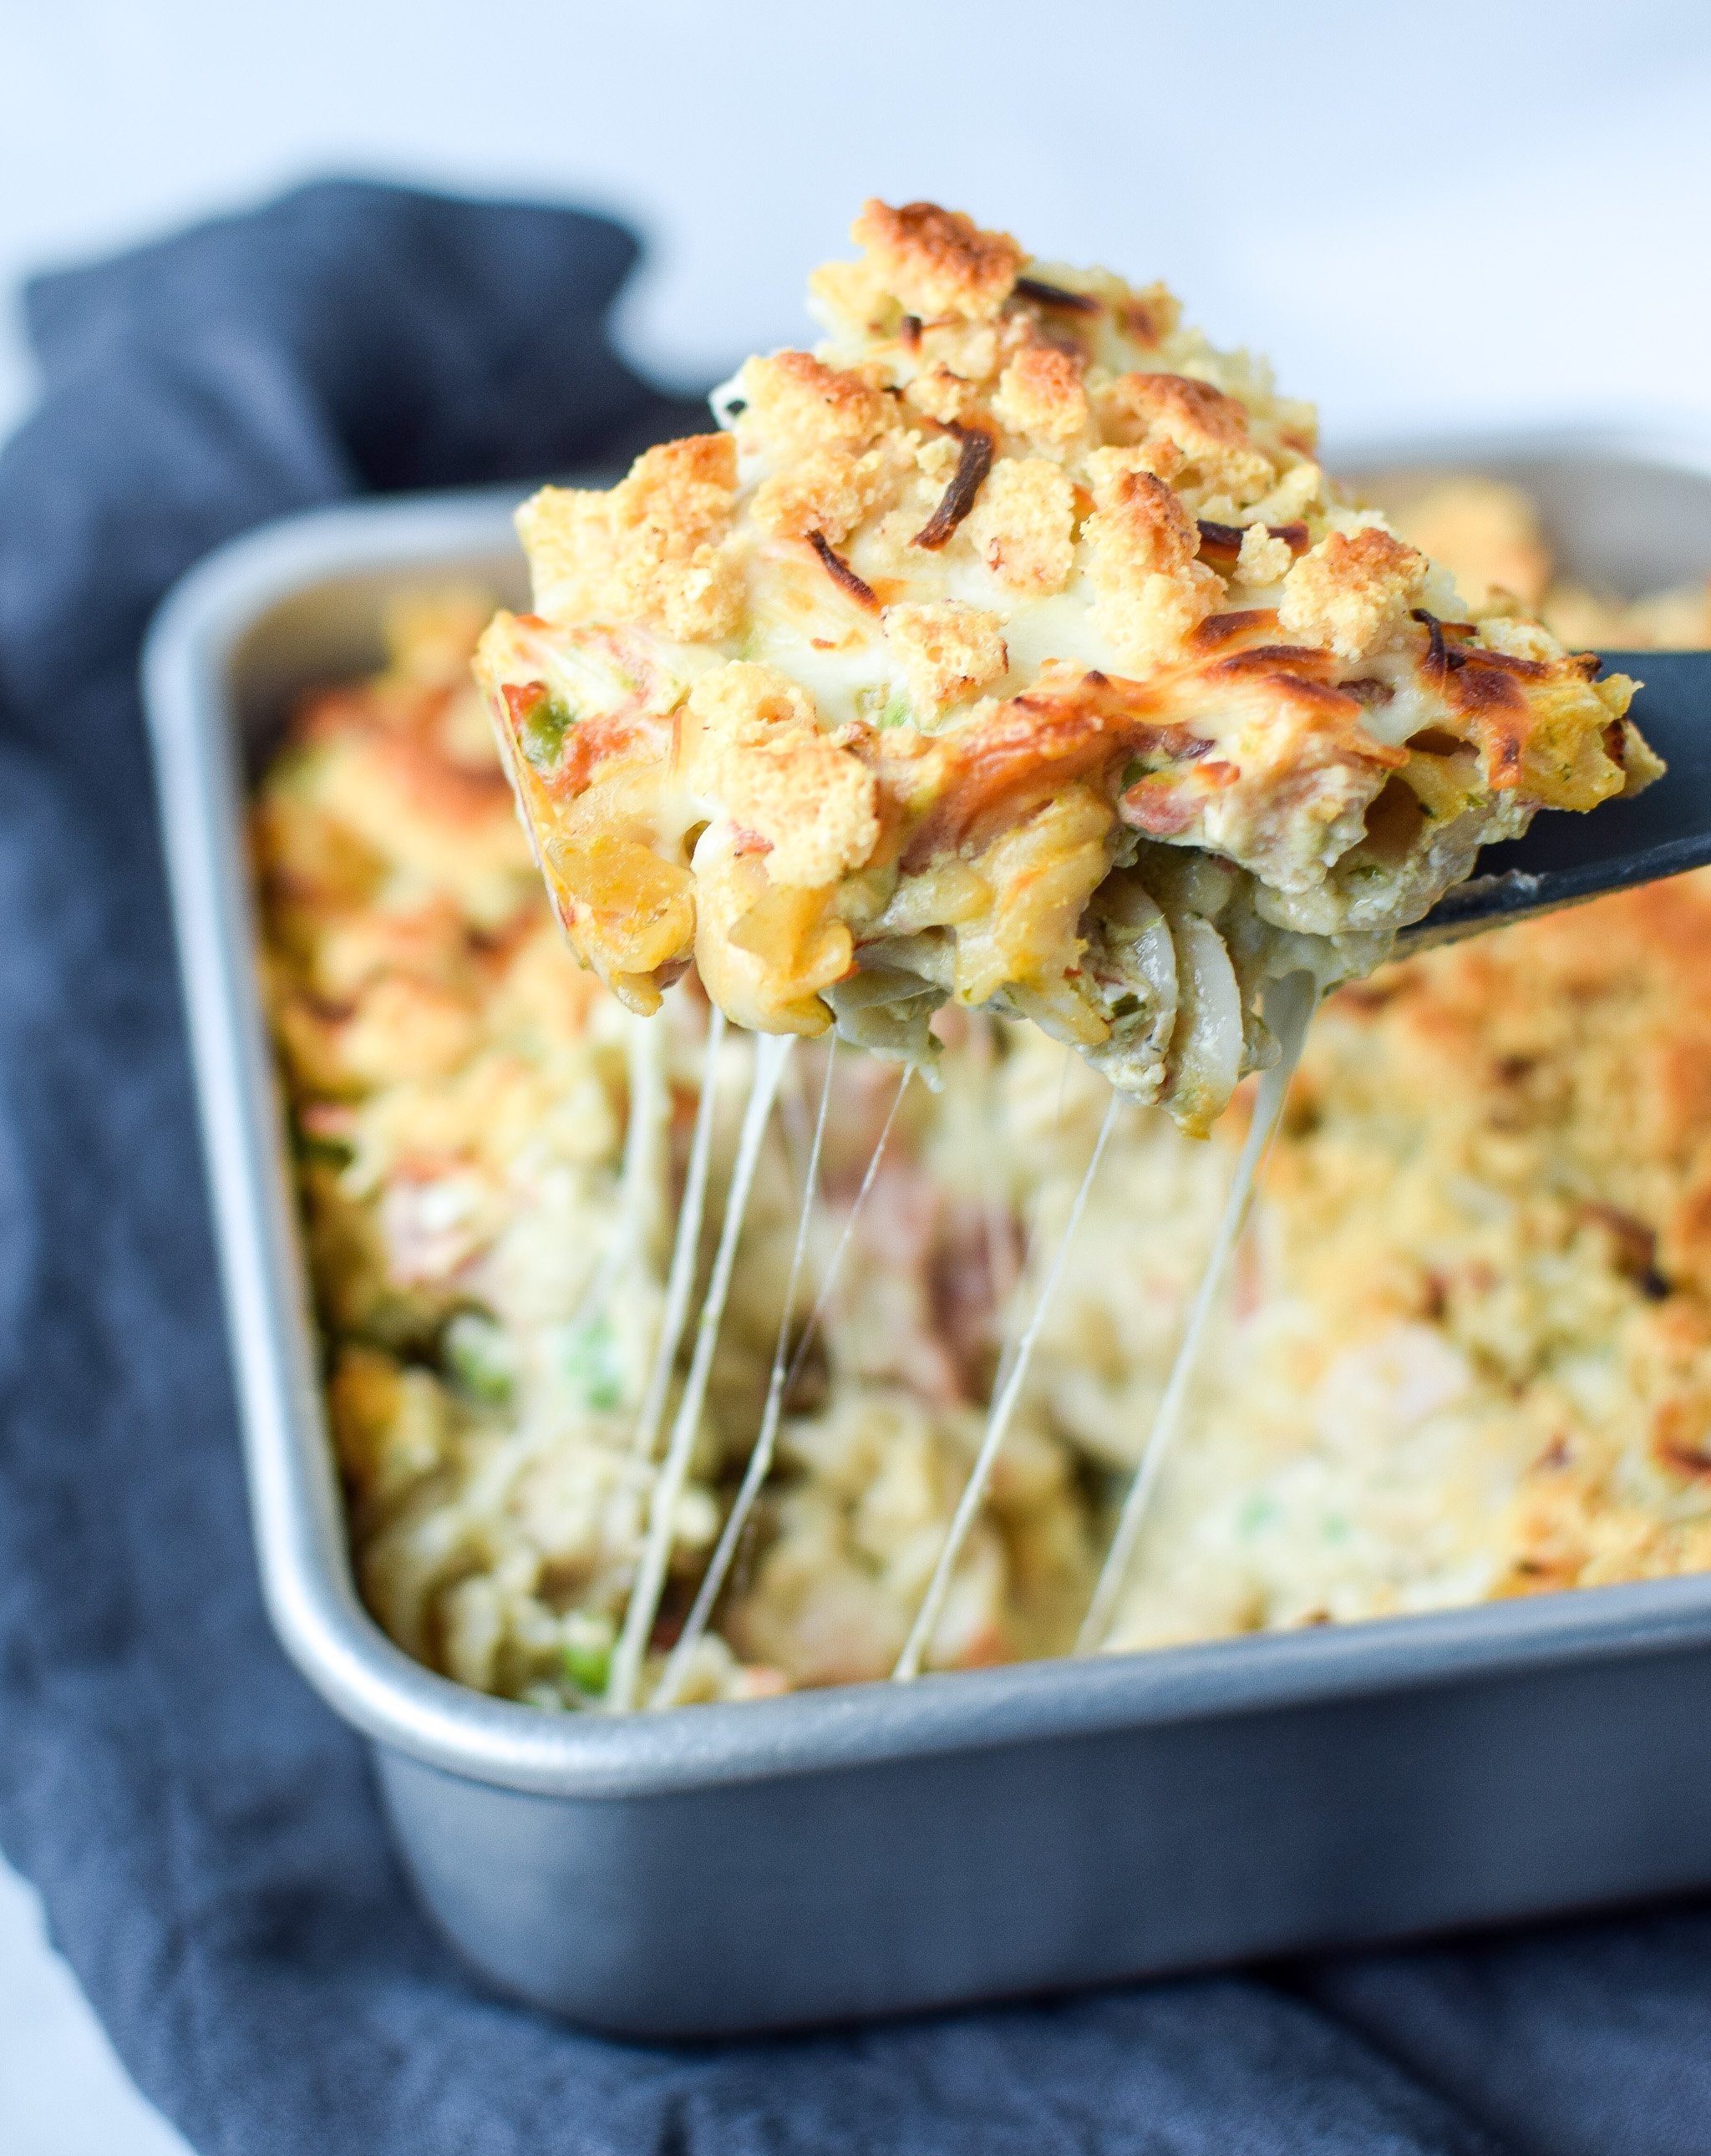 Creamy Pesto Pasta Chicken Bake with Peas - Pesto, chicken, noodles and more in this simple weeknight dinner! Perfect for leftover chicken! - ProjectMealPlan.com